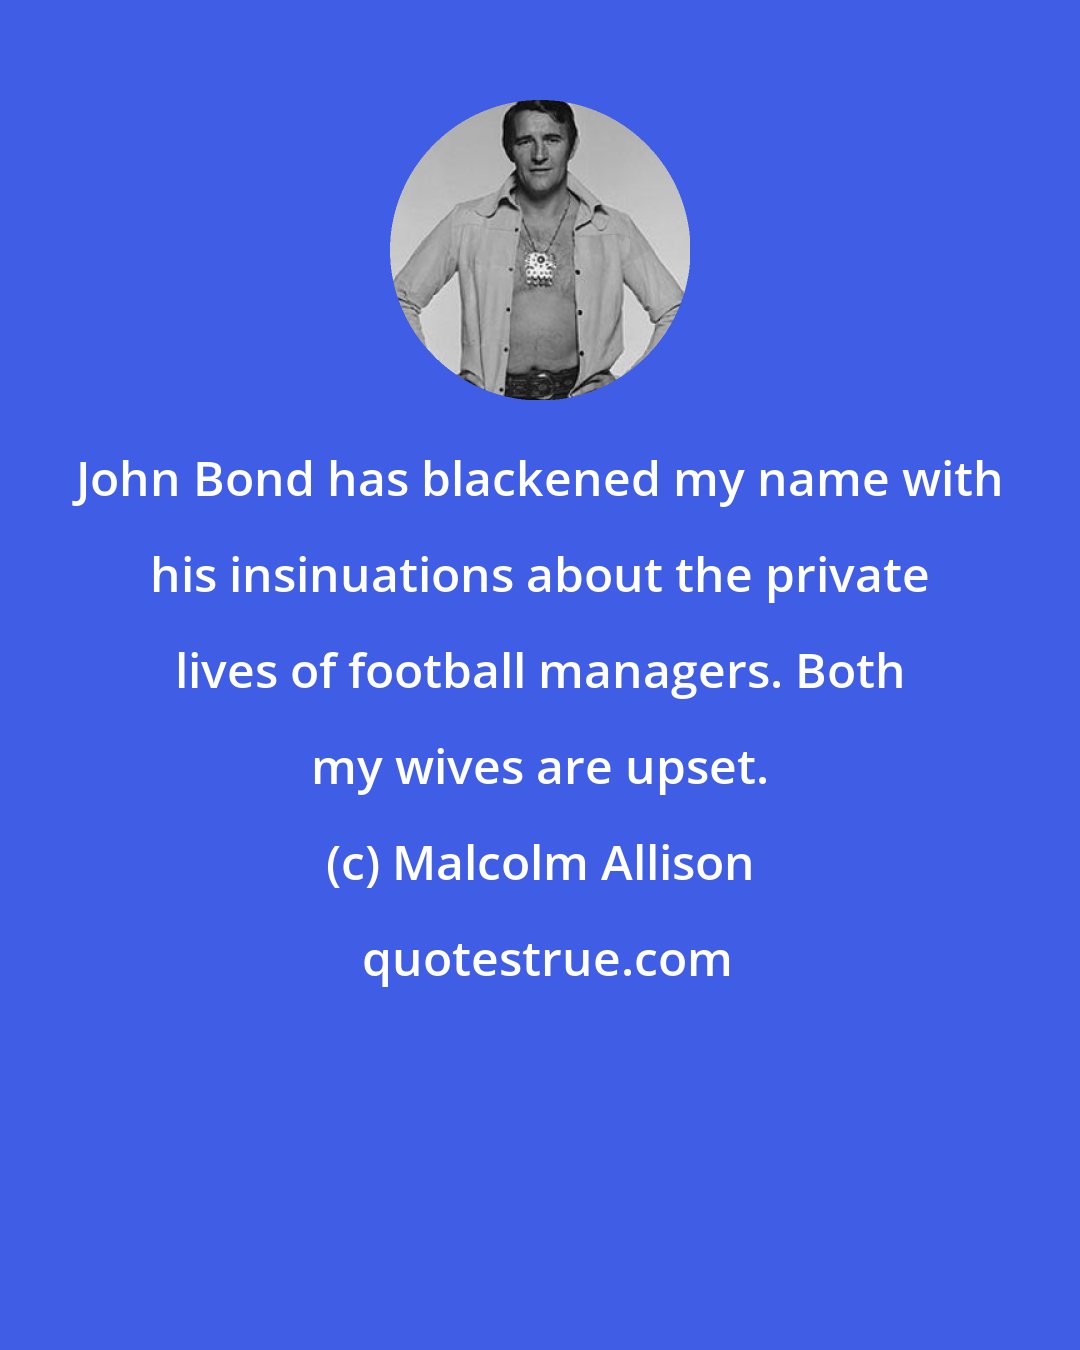 Malcolm Allison: John Bond has blackened my name with his insinuations about the private lives of football managers. Both my wives are upset.